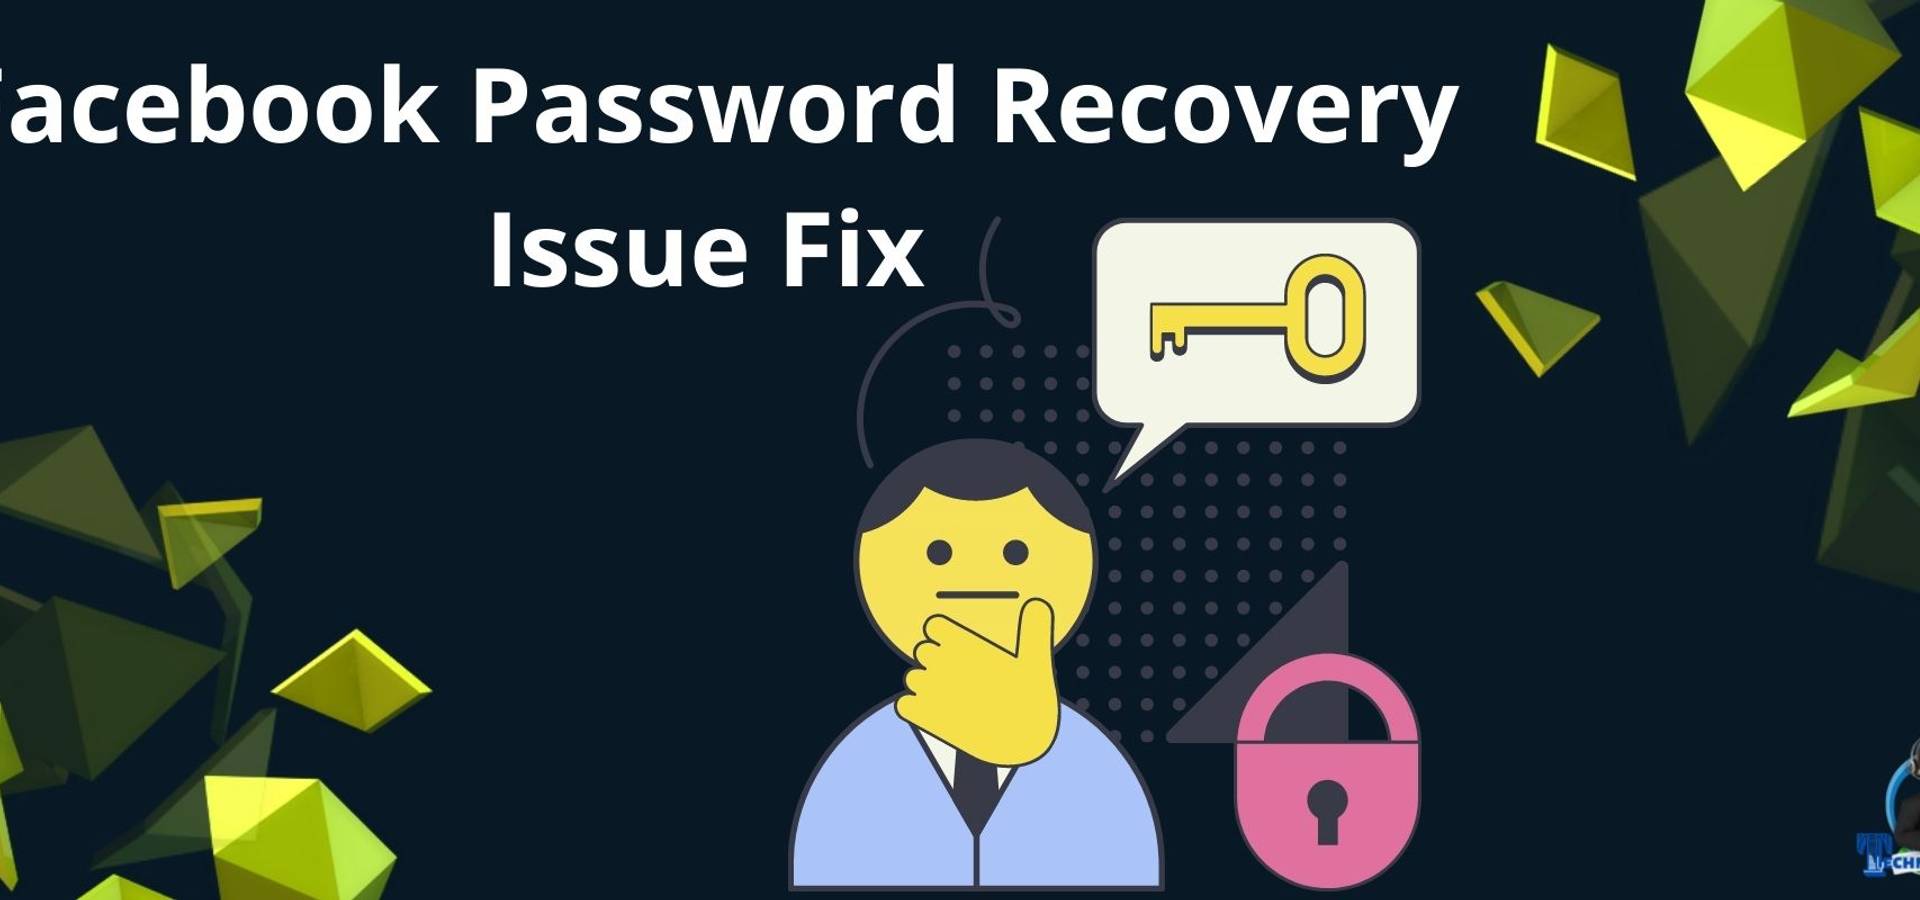 Facebook Password Recovery Issue Fix